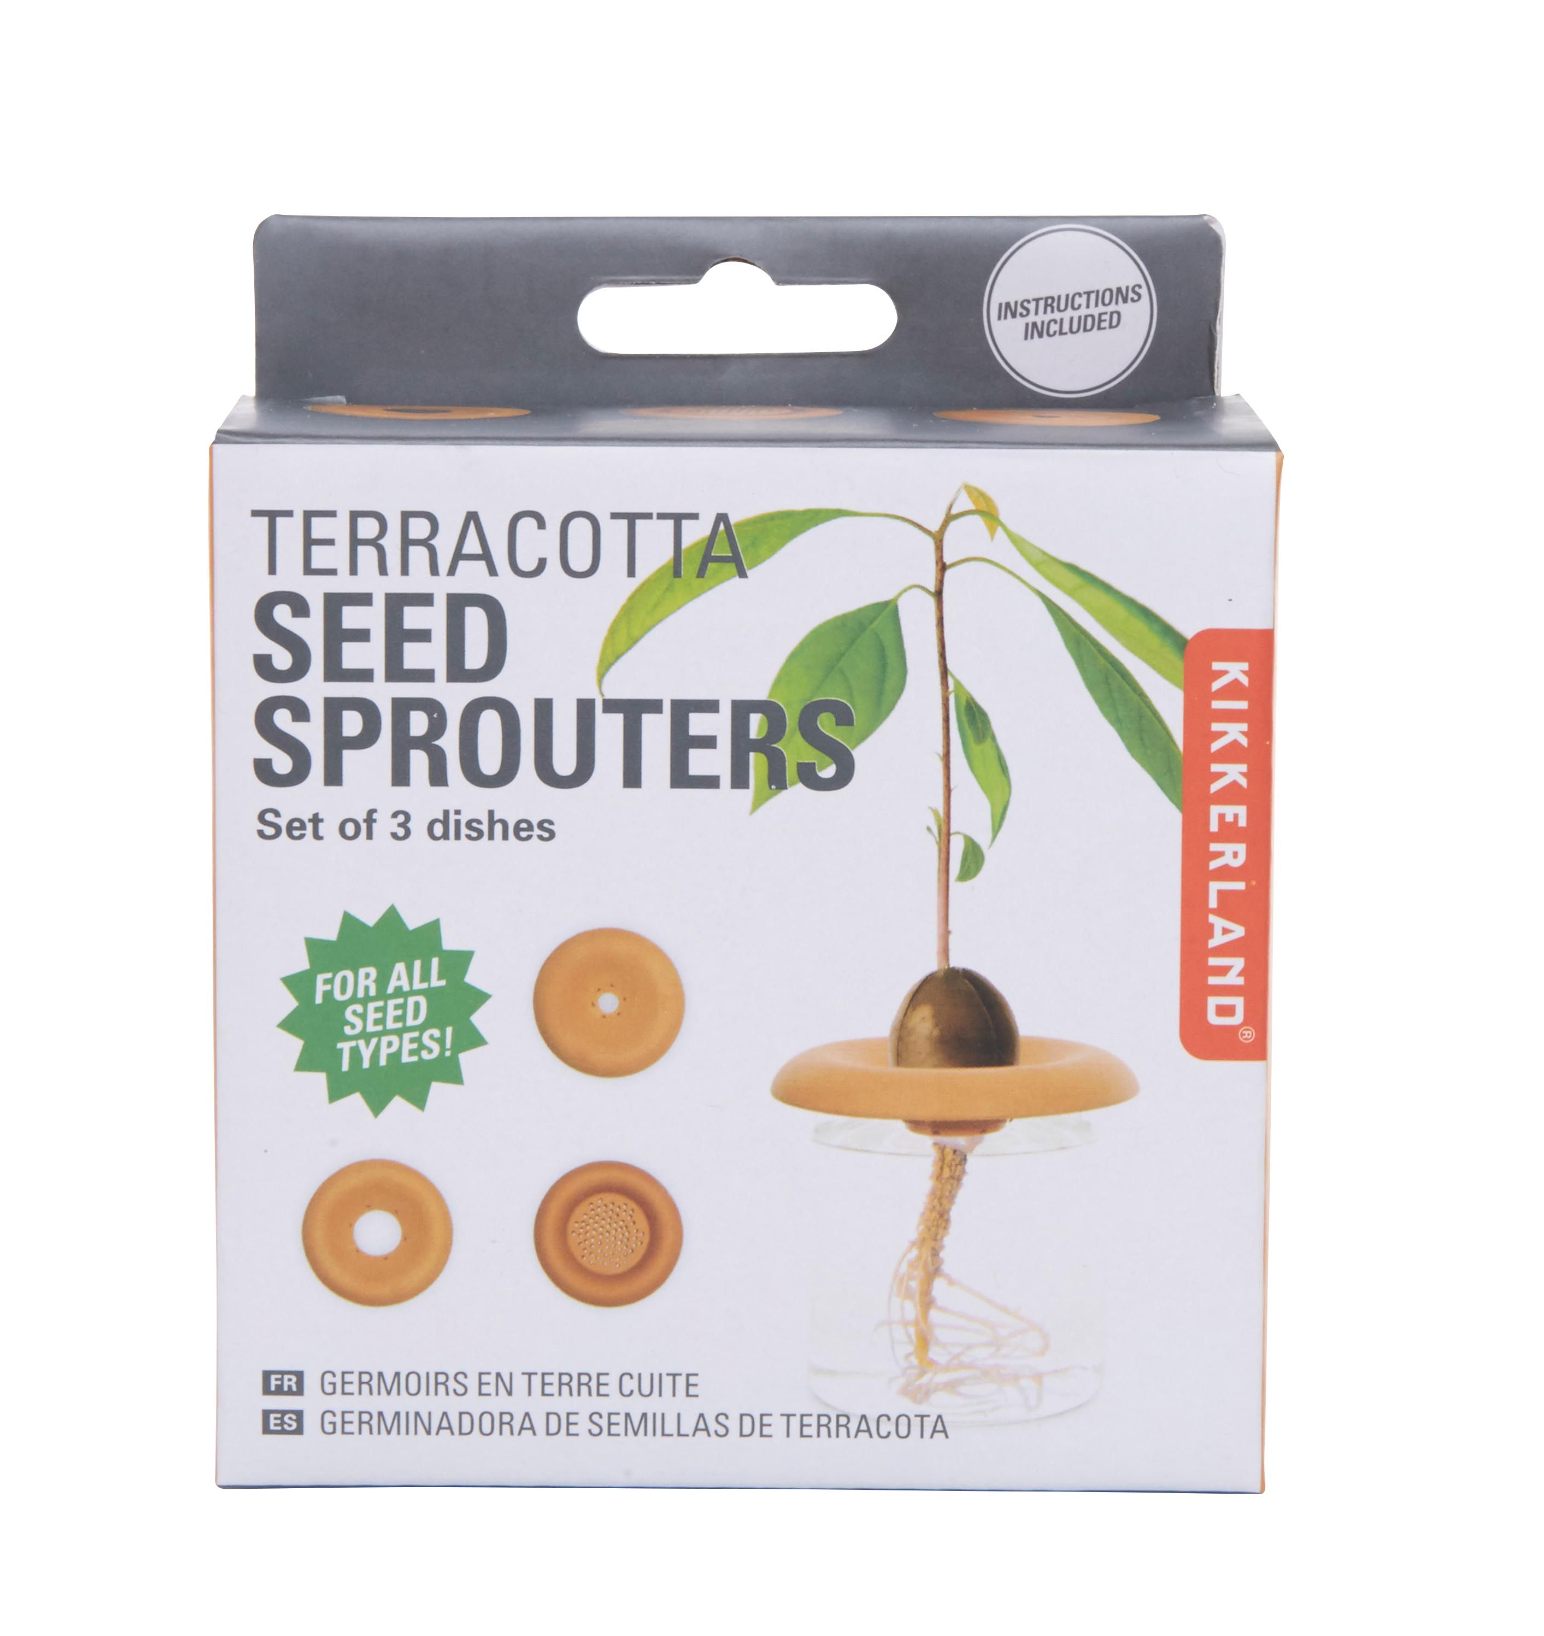 Terracotta Seed Sprouters x Kikkerland